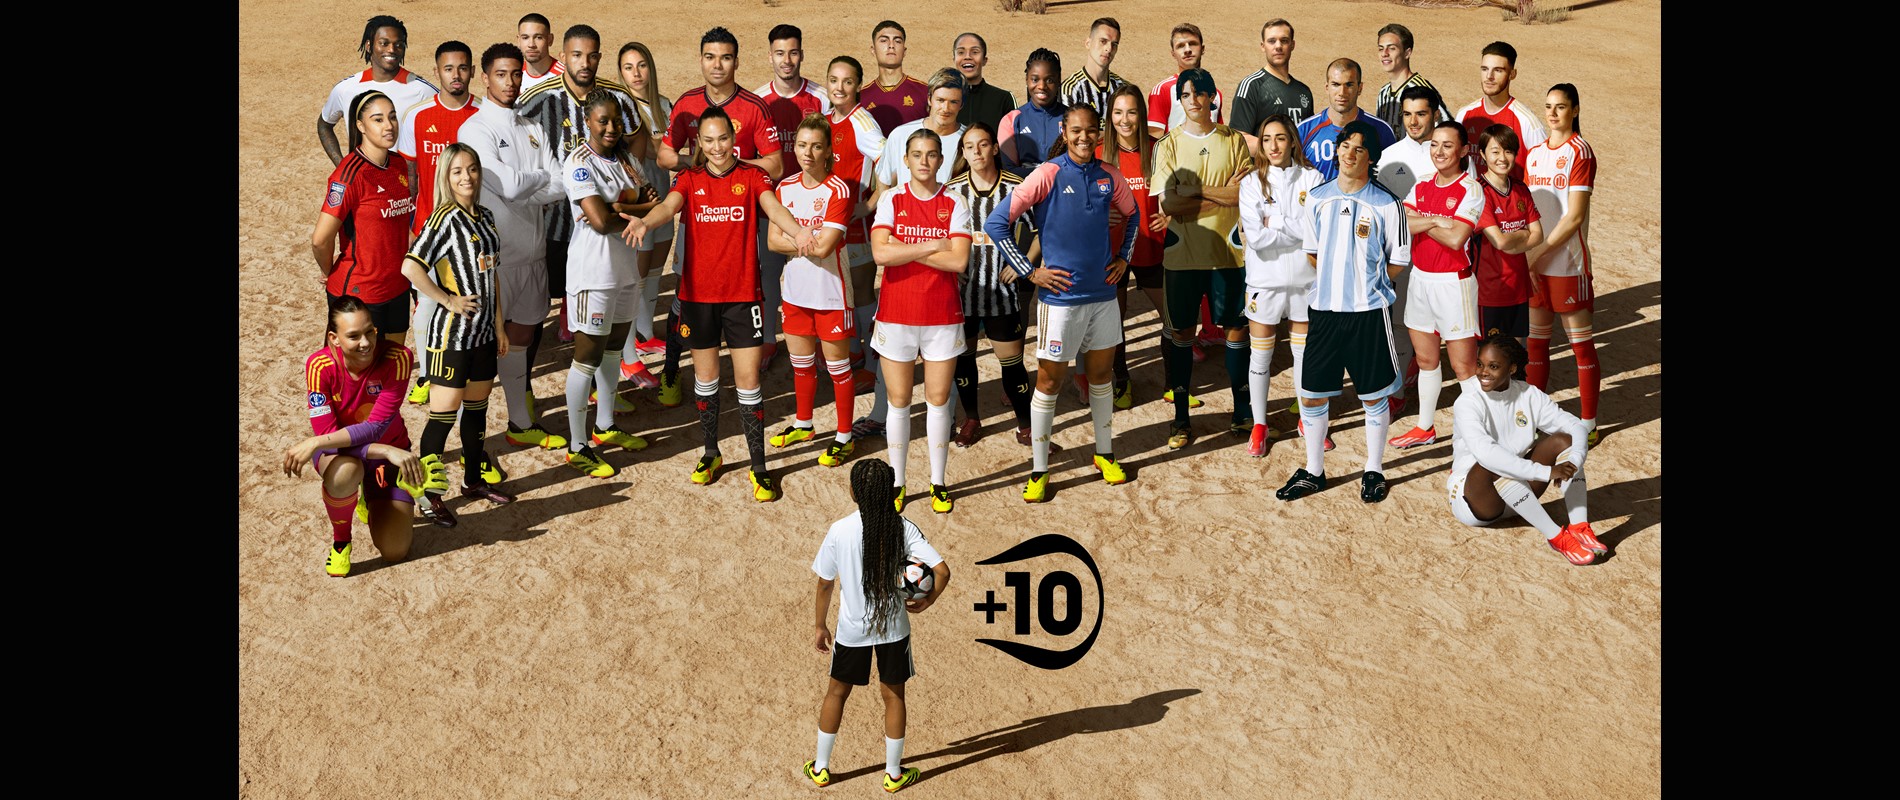 adidas Showcases Potential for Girls when Staying in Sport by Recreating Iconic 2006 Jose 10 Campaign Image with All Star Line Up of Role Models and Icons